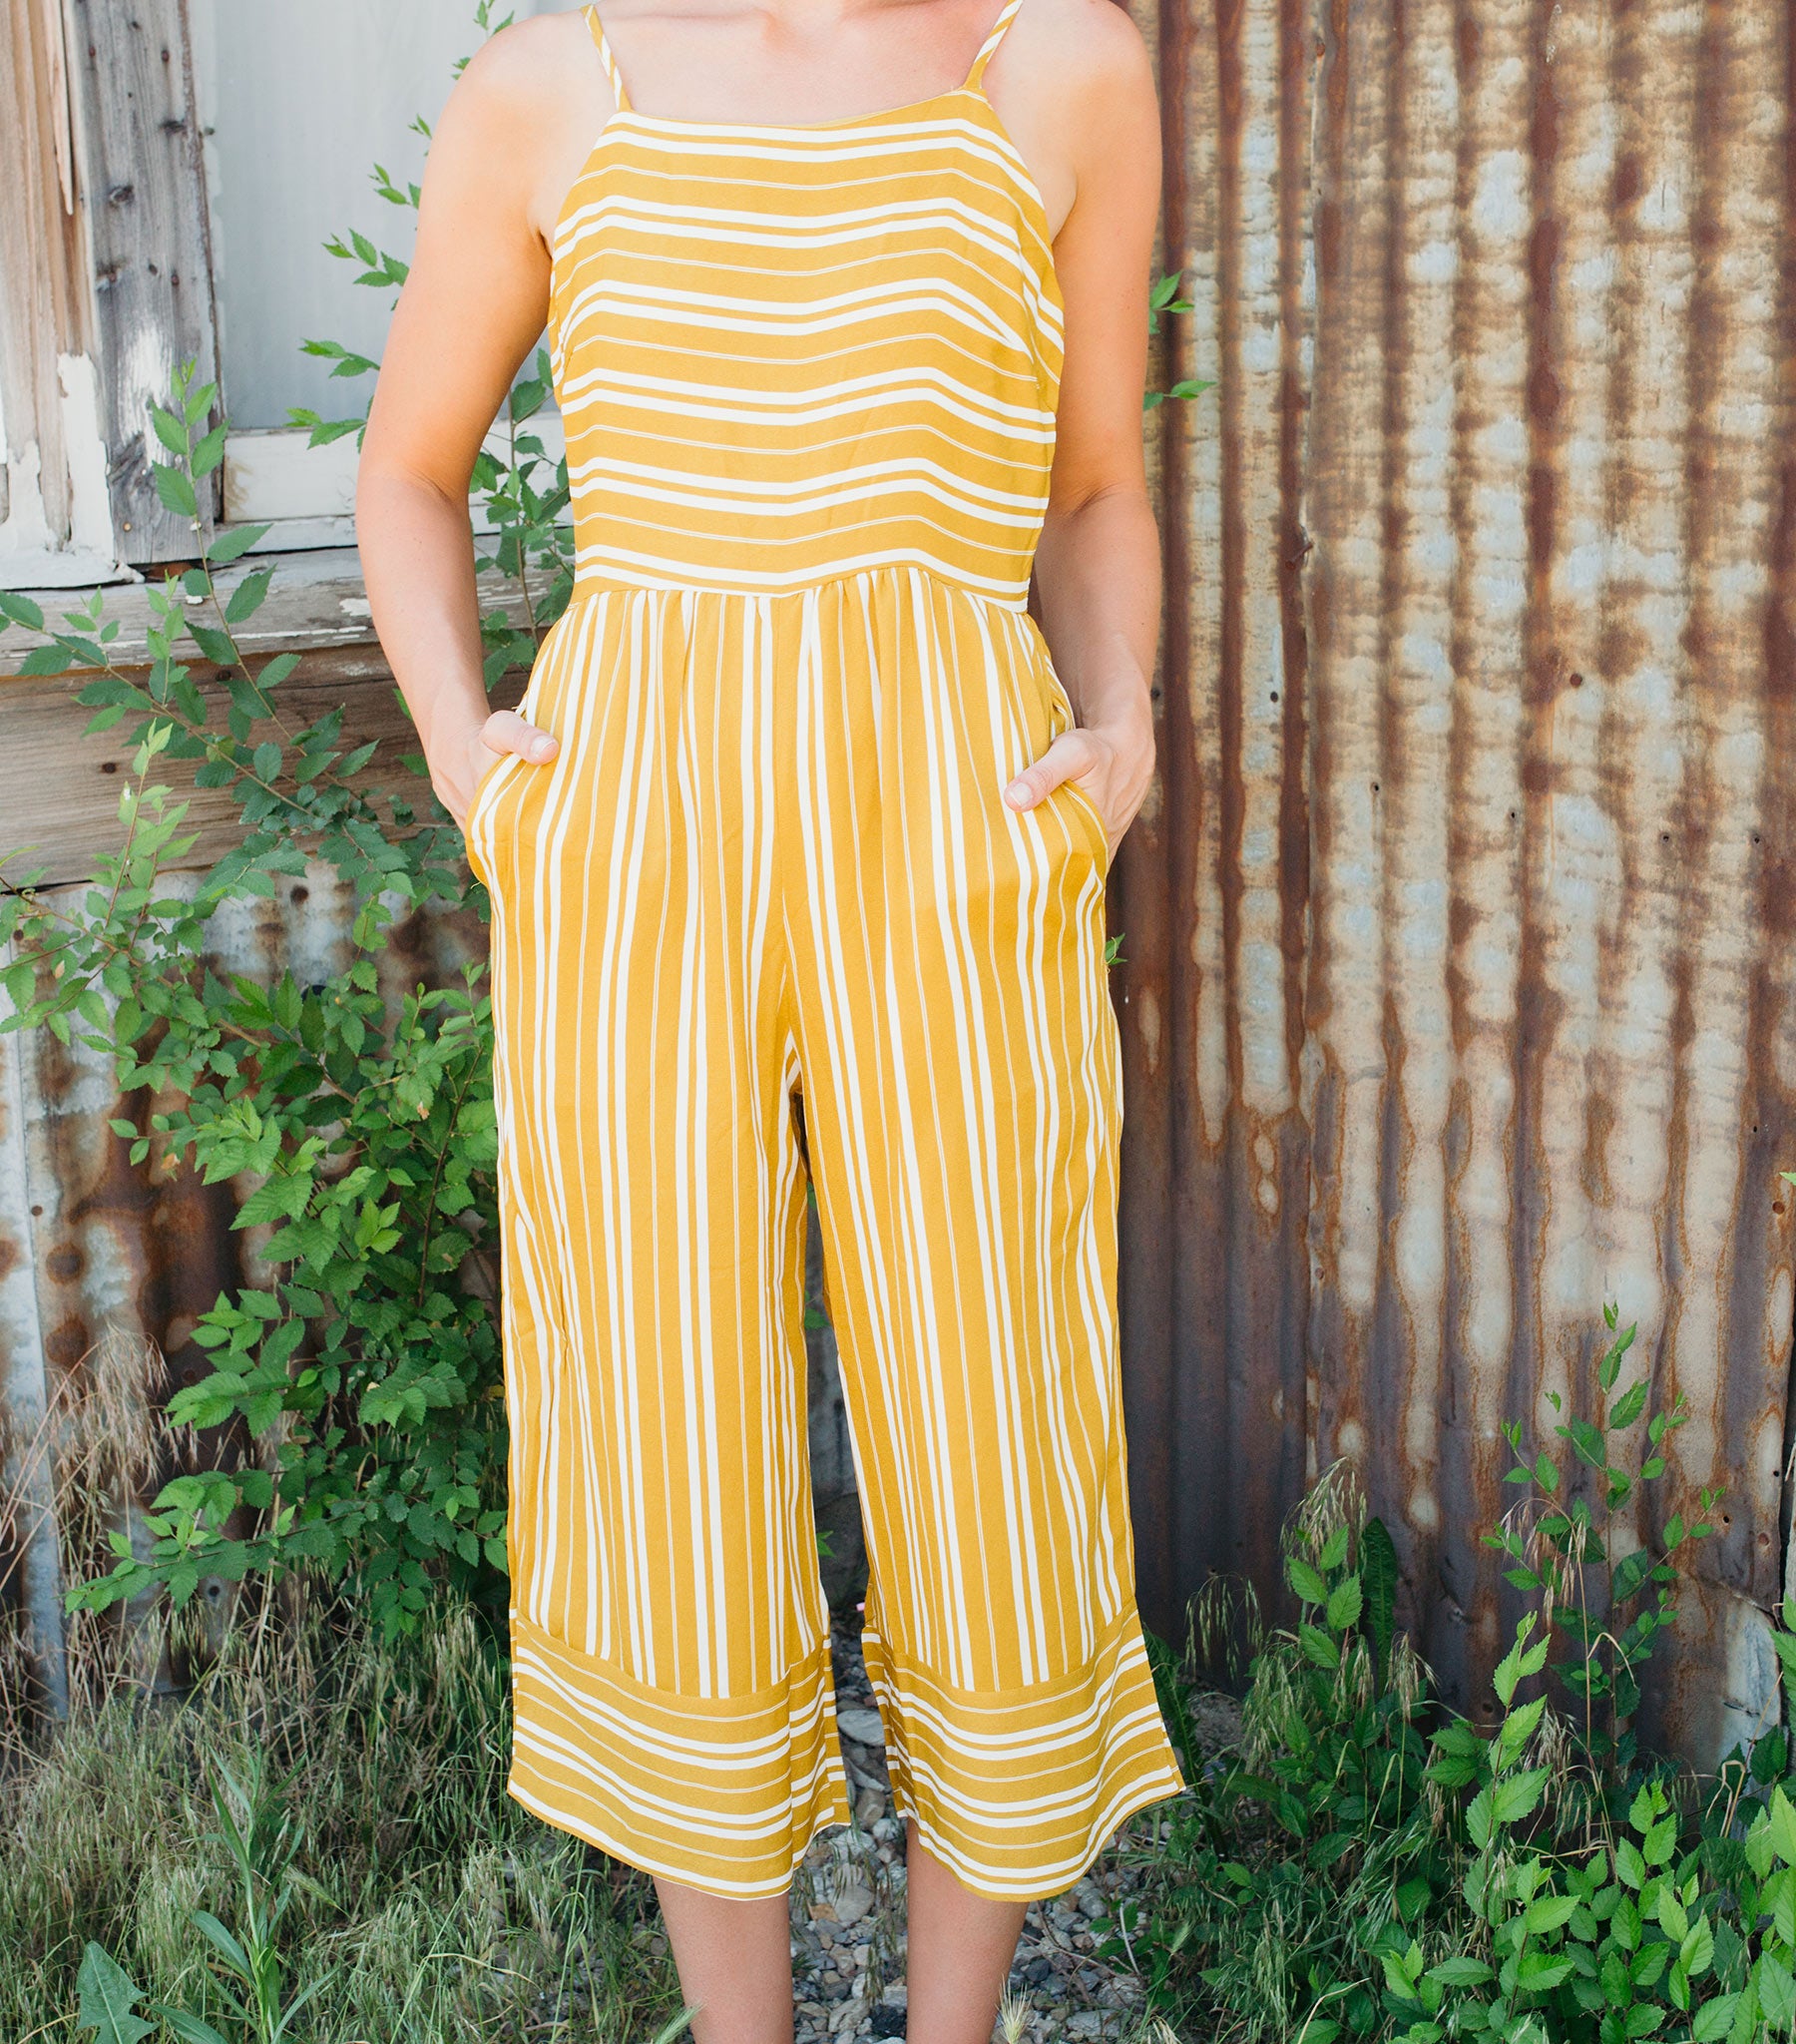 The Newest Boho Chic Trends & Styles | Hope Ave Page 2 - Hope Ave Boutique